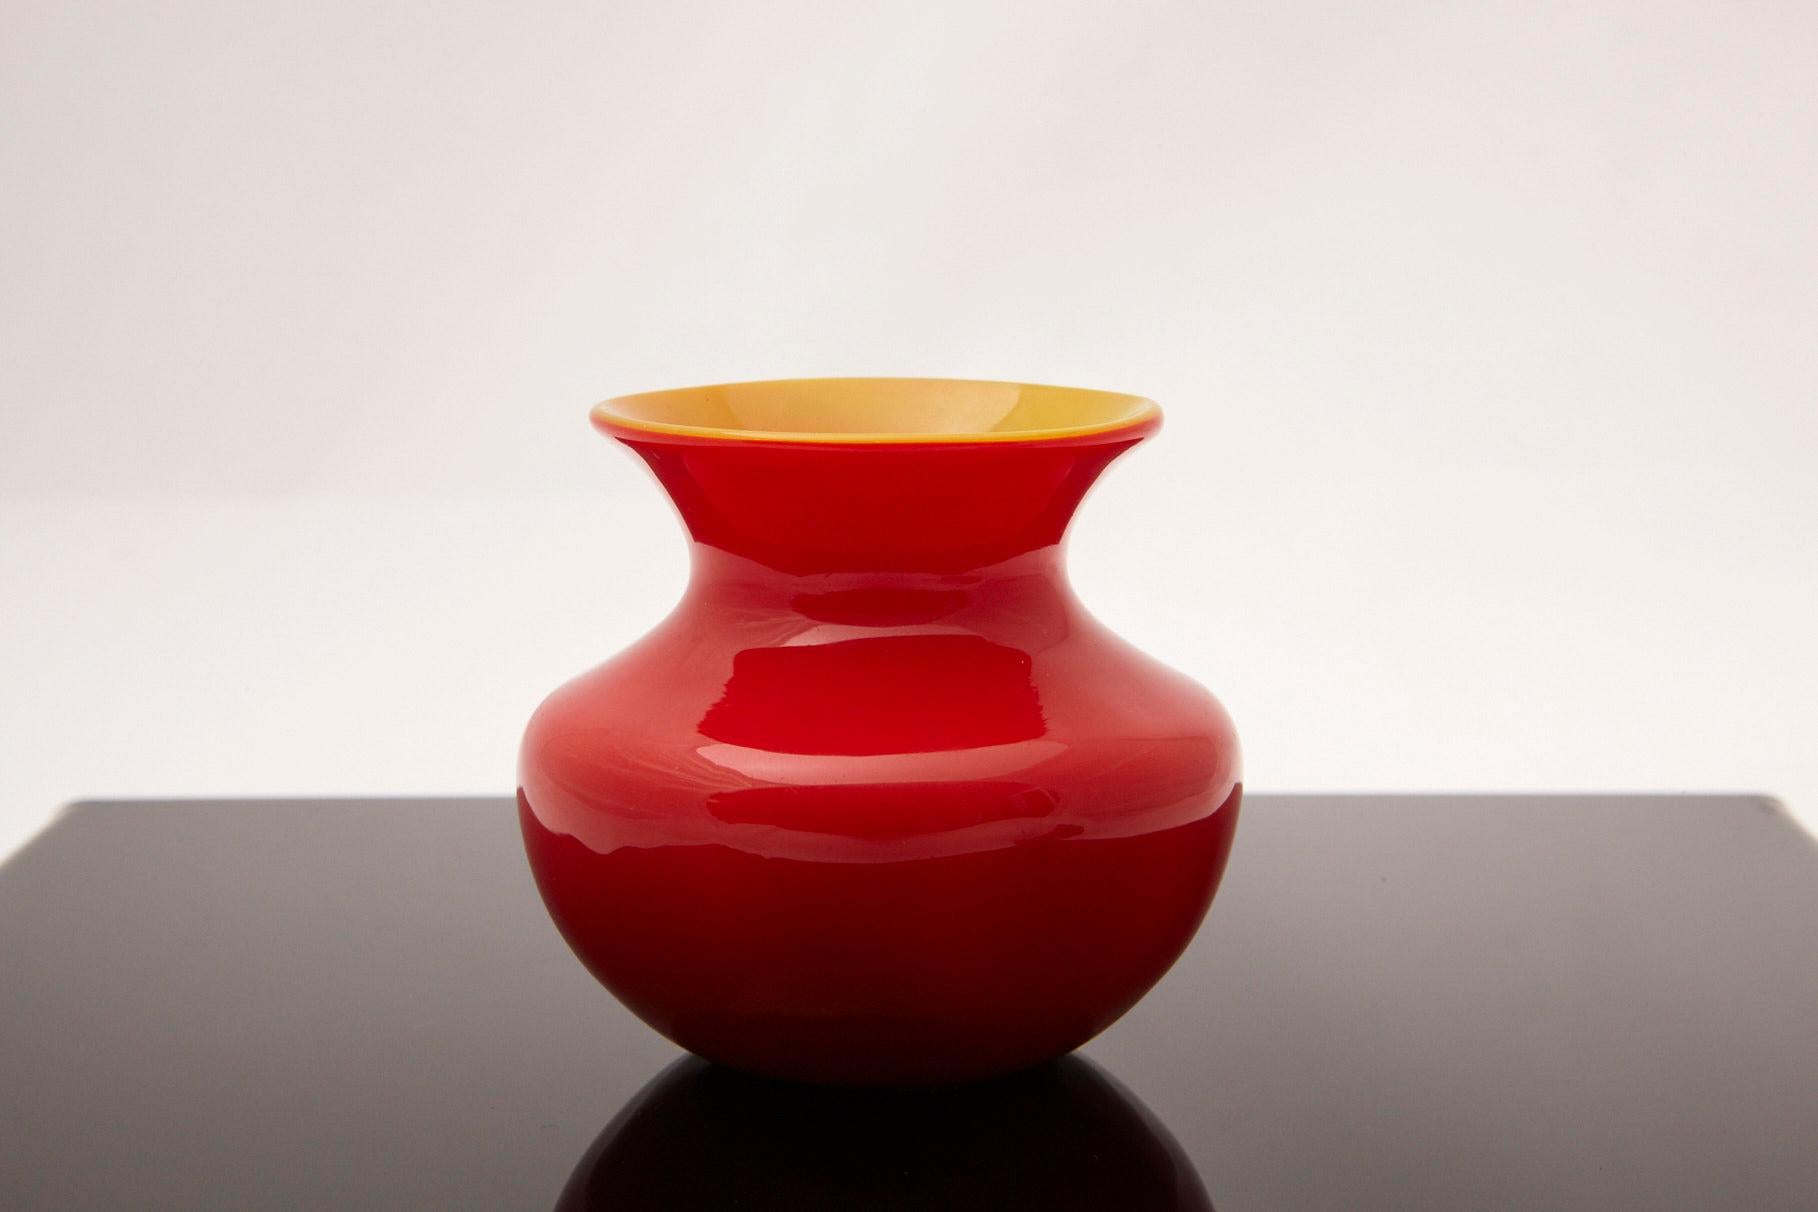 Lovely petite Tiffany Favrile cased red yellow glass miniature vase, circa 1915. 
The vase is signed on the underside L.C.Tiffany - Favrile 656 F. The initials L.C. stand for Louis Comfort Tiffany.
The vase was purchased at a Sotheby's auction in